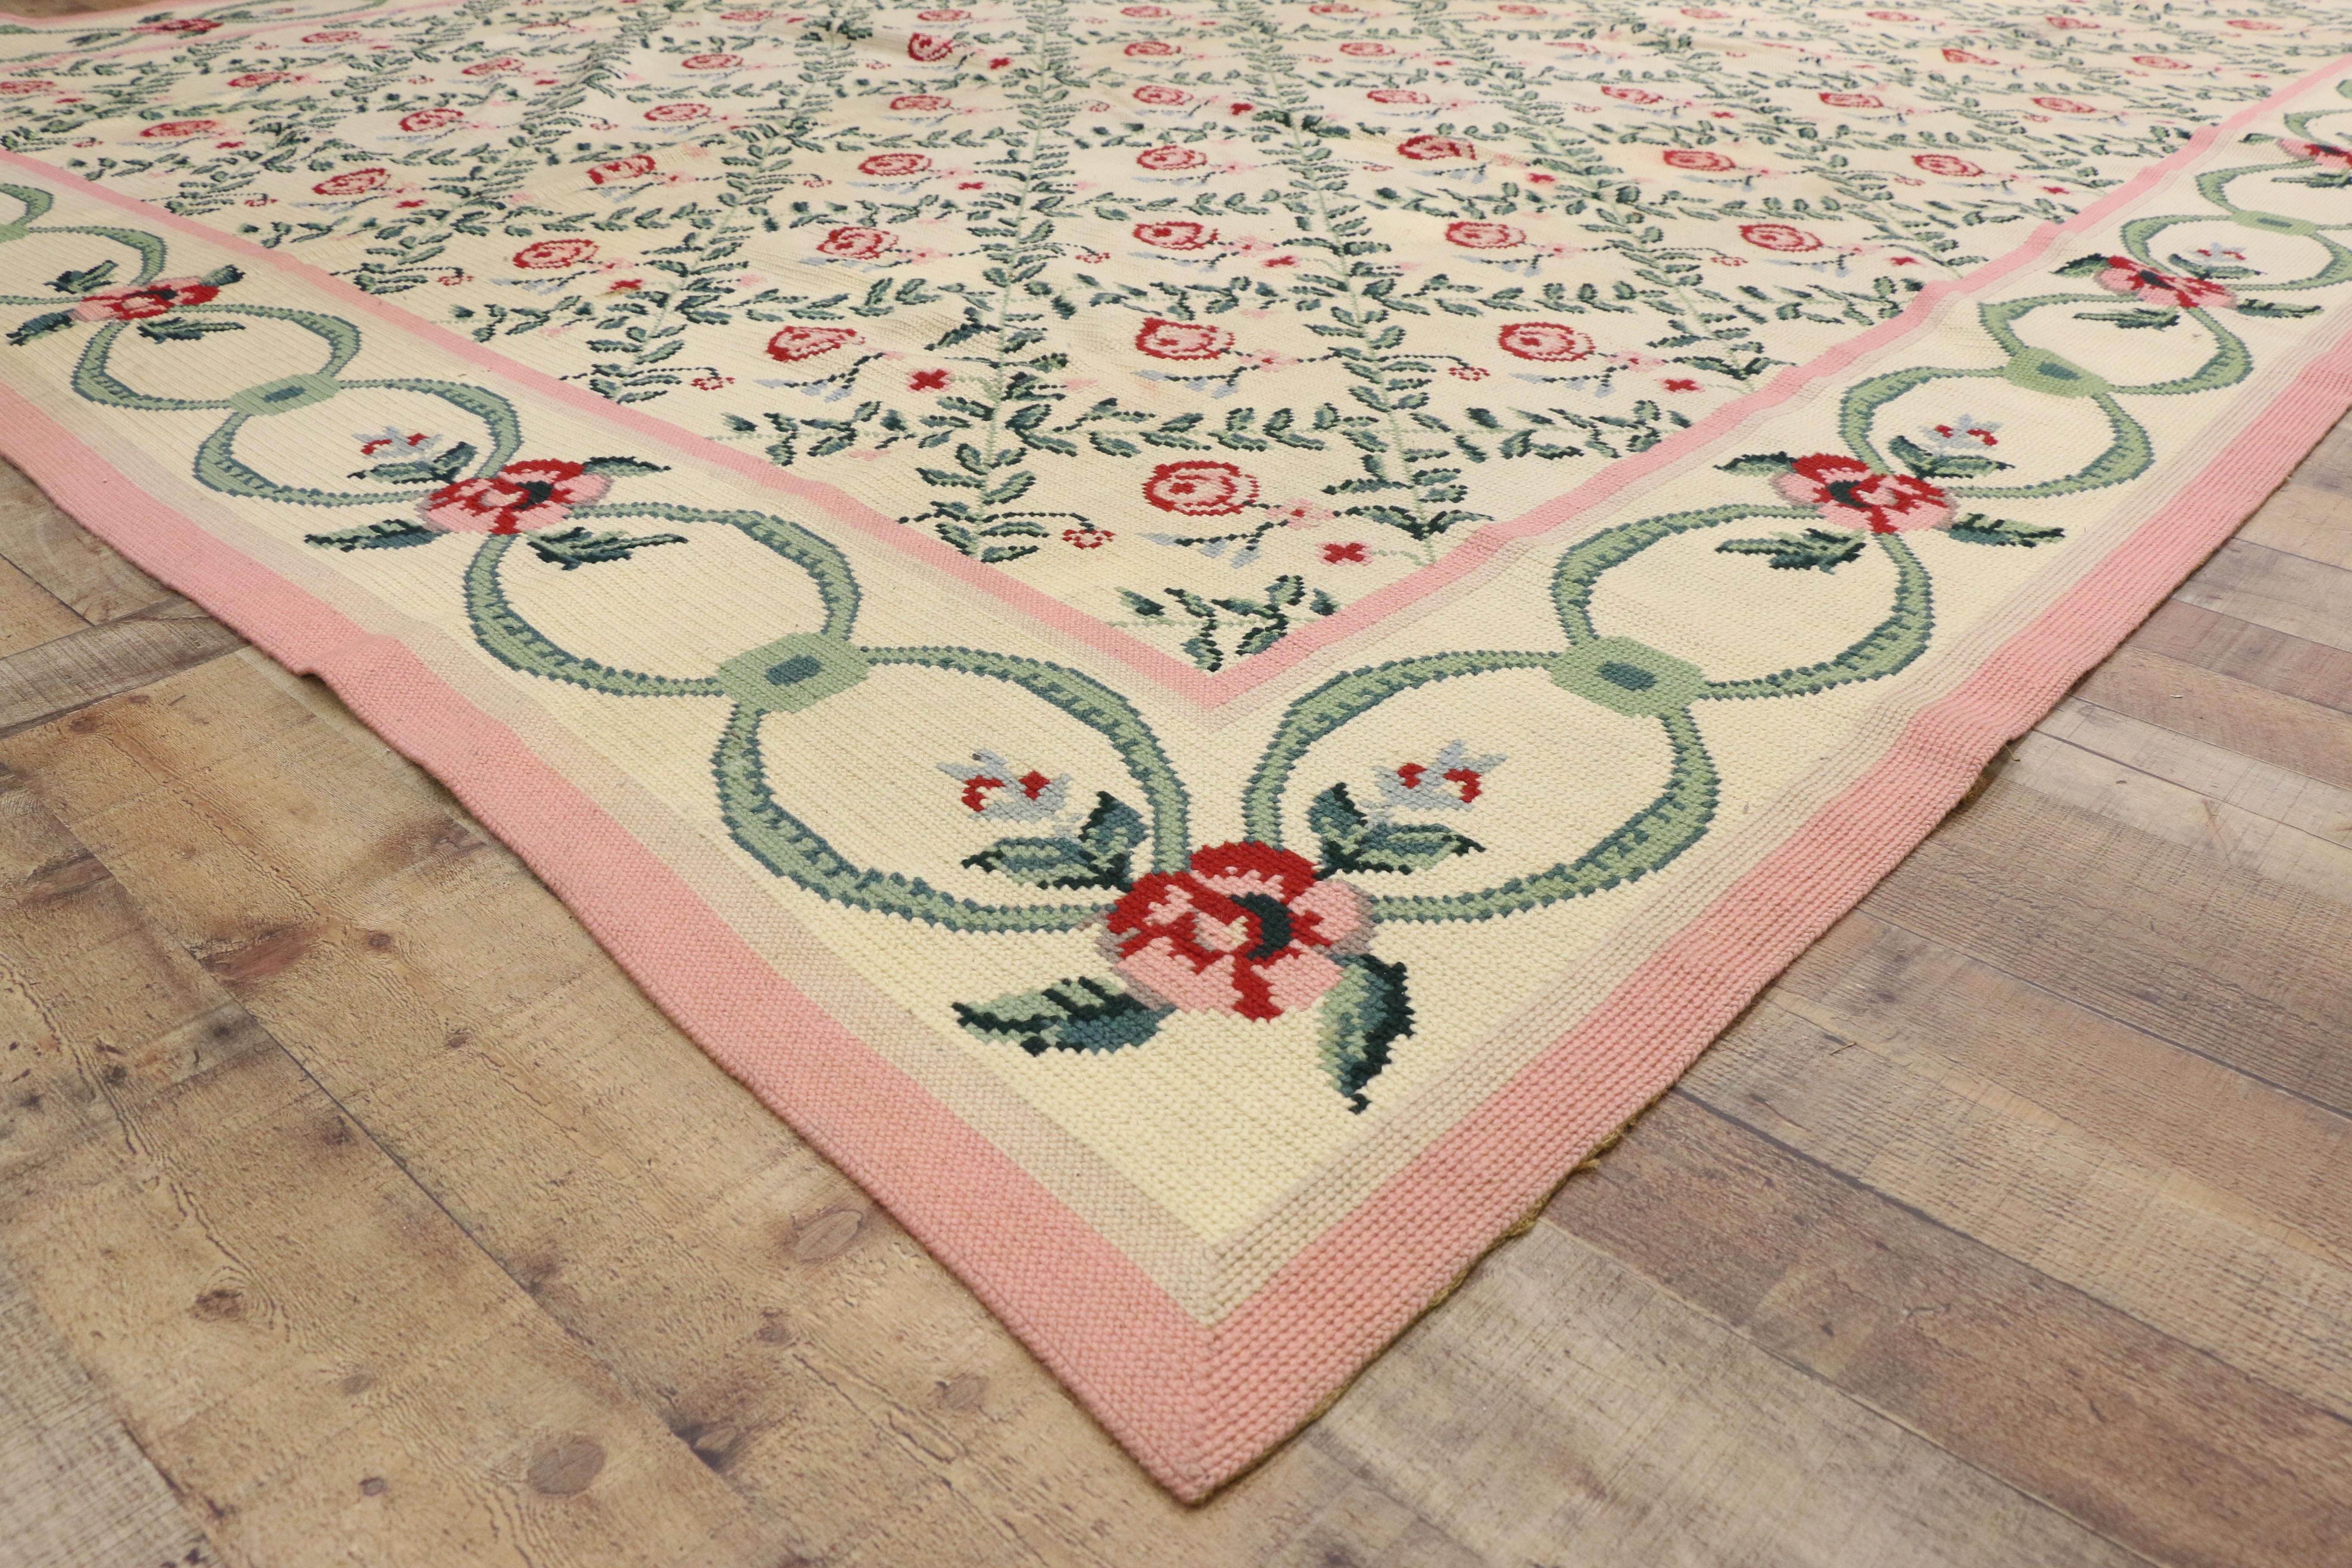 77205 Vintage French Aubusson Floral Trellis Needlepoint Chinese Rug with Chintz Style. Drawing inspiration from Mario Buatta and Chintz style, this needlepoint Aubusson style rug beautifully showcases a timeless floral trellis design. Pink rosebuds